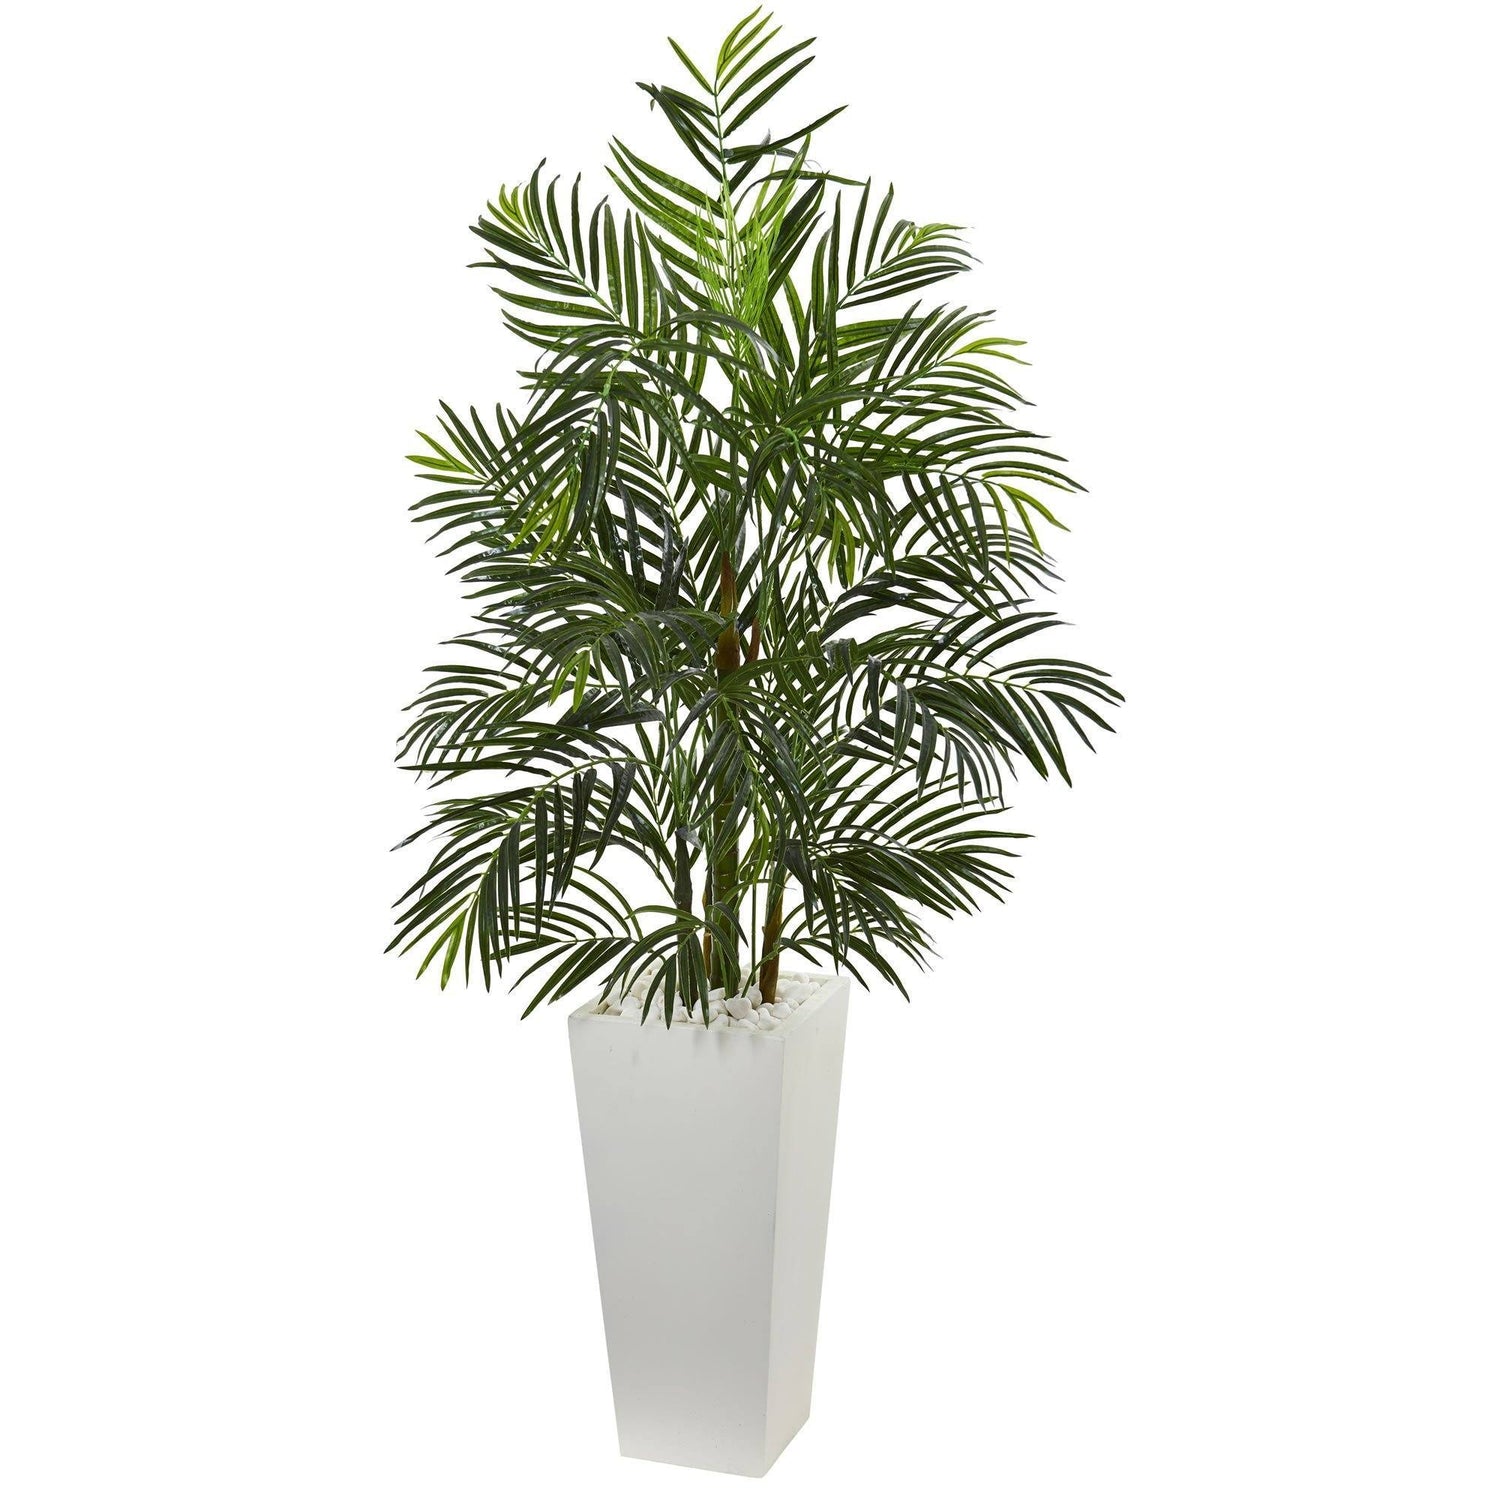 5’ Areca Artificial Palm Tree in White Planter (Indoor/Outdoor)